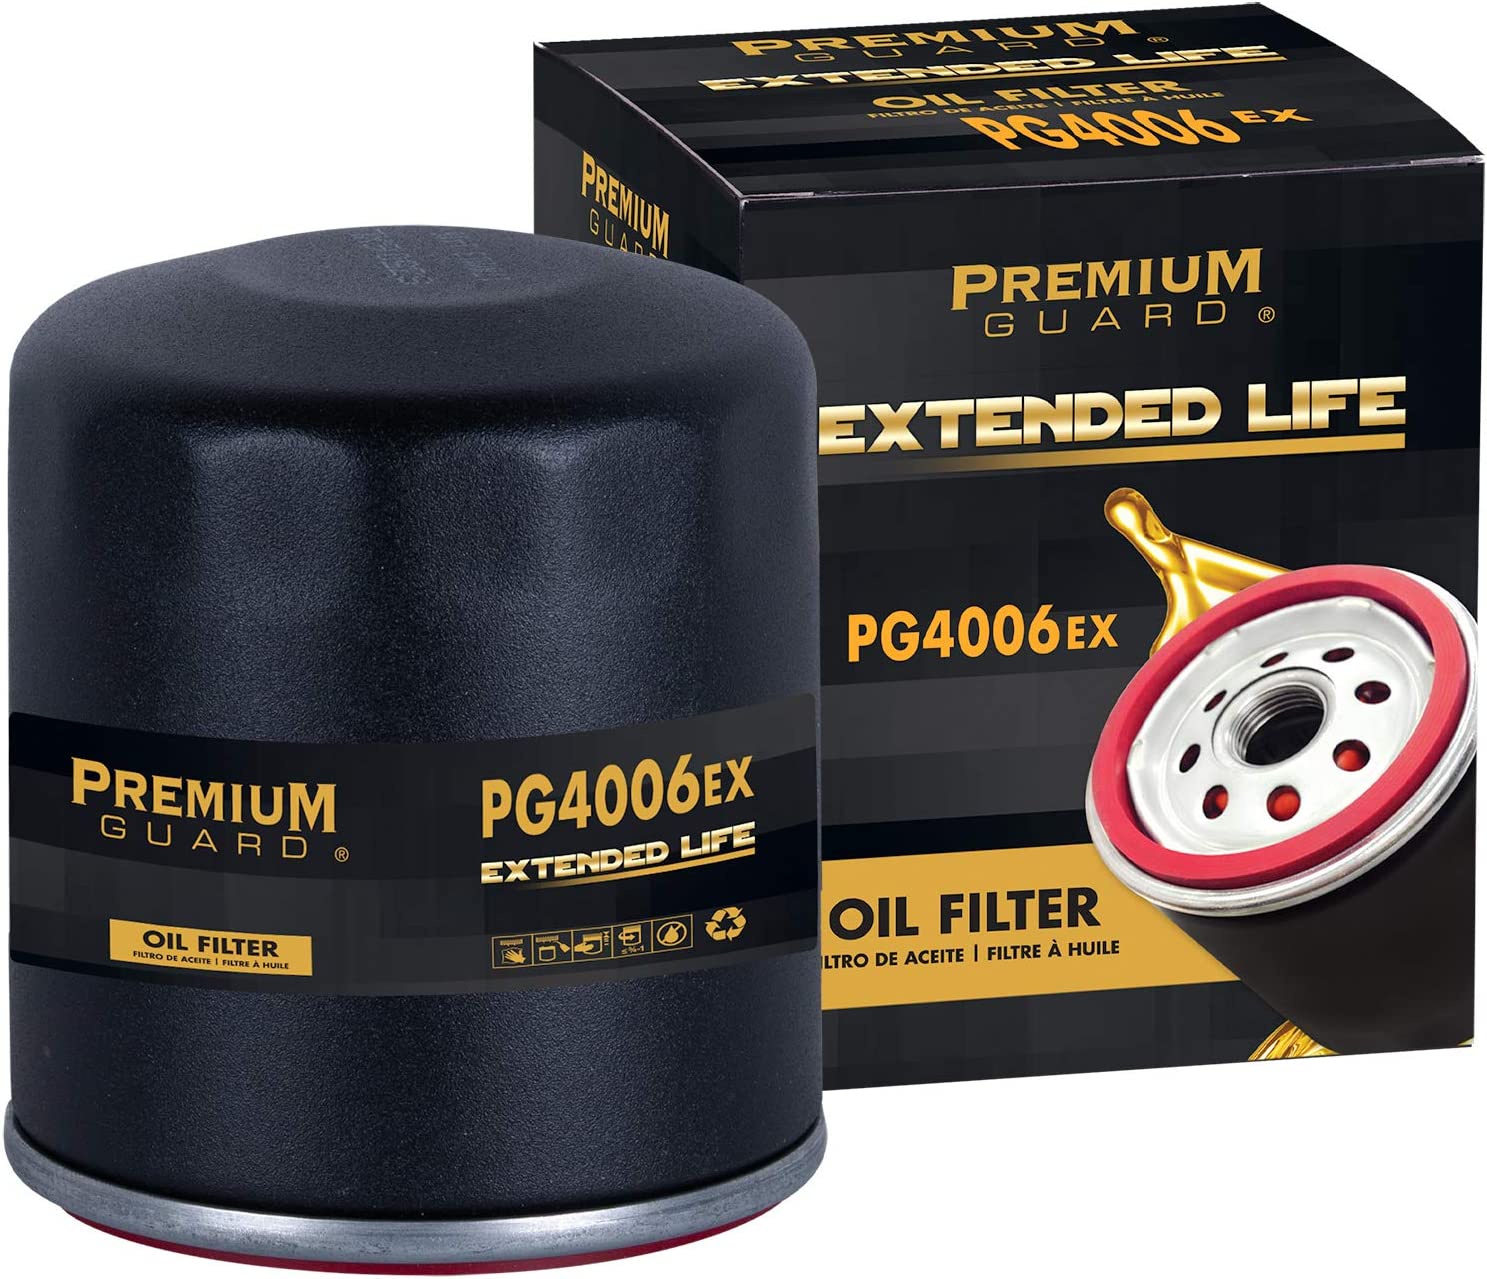 PG4006EX Extended Life Oil Filter up to 10,000 Miles | Fits 2012-1975 Chevrolet, GMC, Hummer, Cadillac, Pontiac, Oldsmobile, Isuzu, Buick, Saab, Workhorse Custom Chassis, Avanti - image 1 of 5